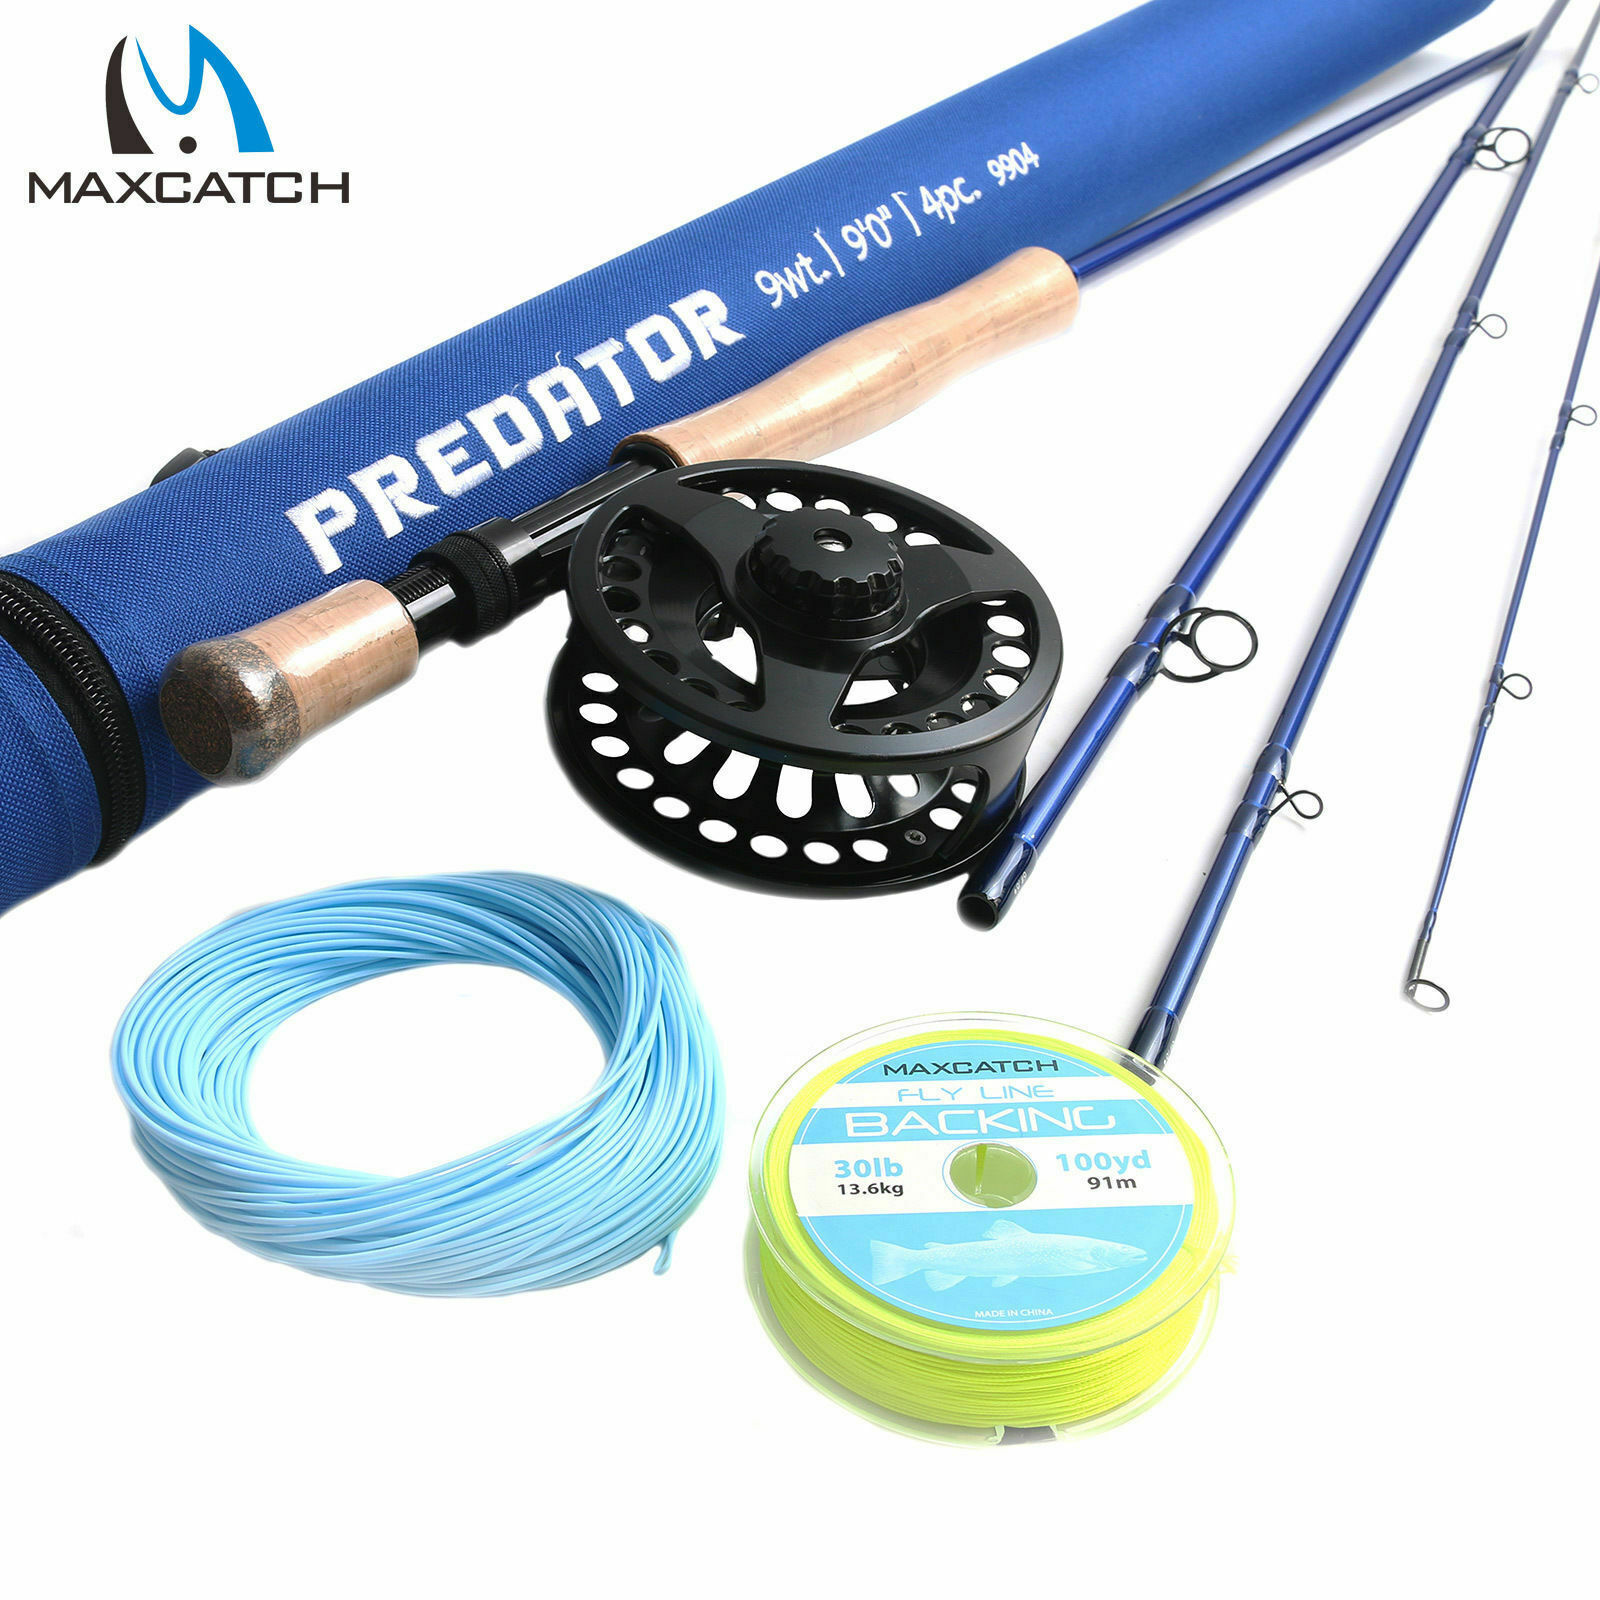 Maxcatch 4in1/2in1 Nymph Fly Fishing Rod with Extra Extension Section with  Hard Tube 9'-10'6' '/ 9'6-11'0 4-6 Sec - AliExpress